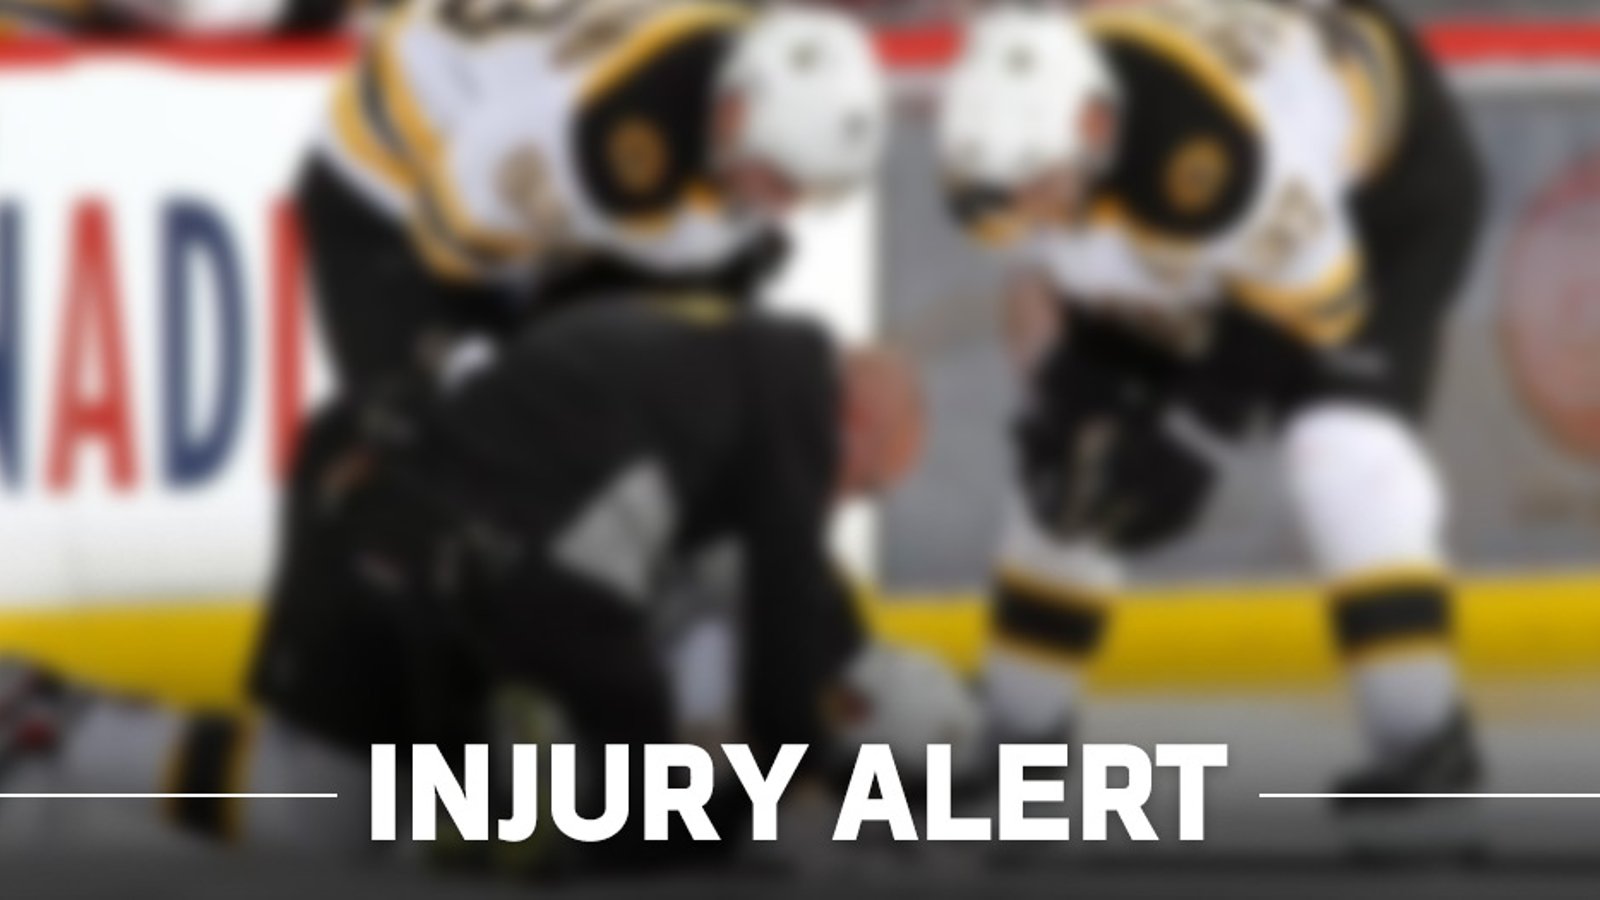 INJURY ALERT: One Key player out due to injury, confirmed Cassidy.